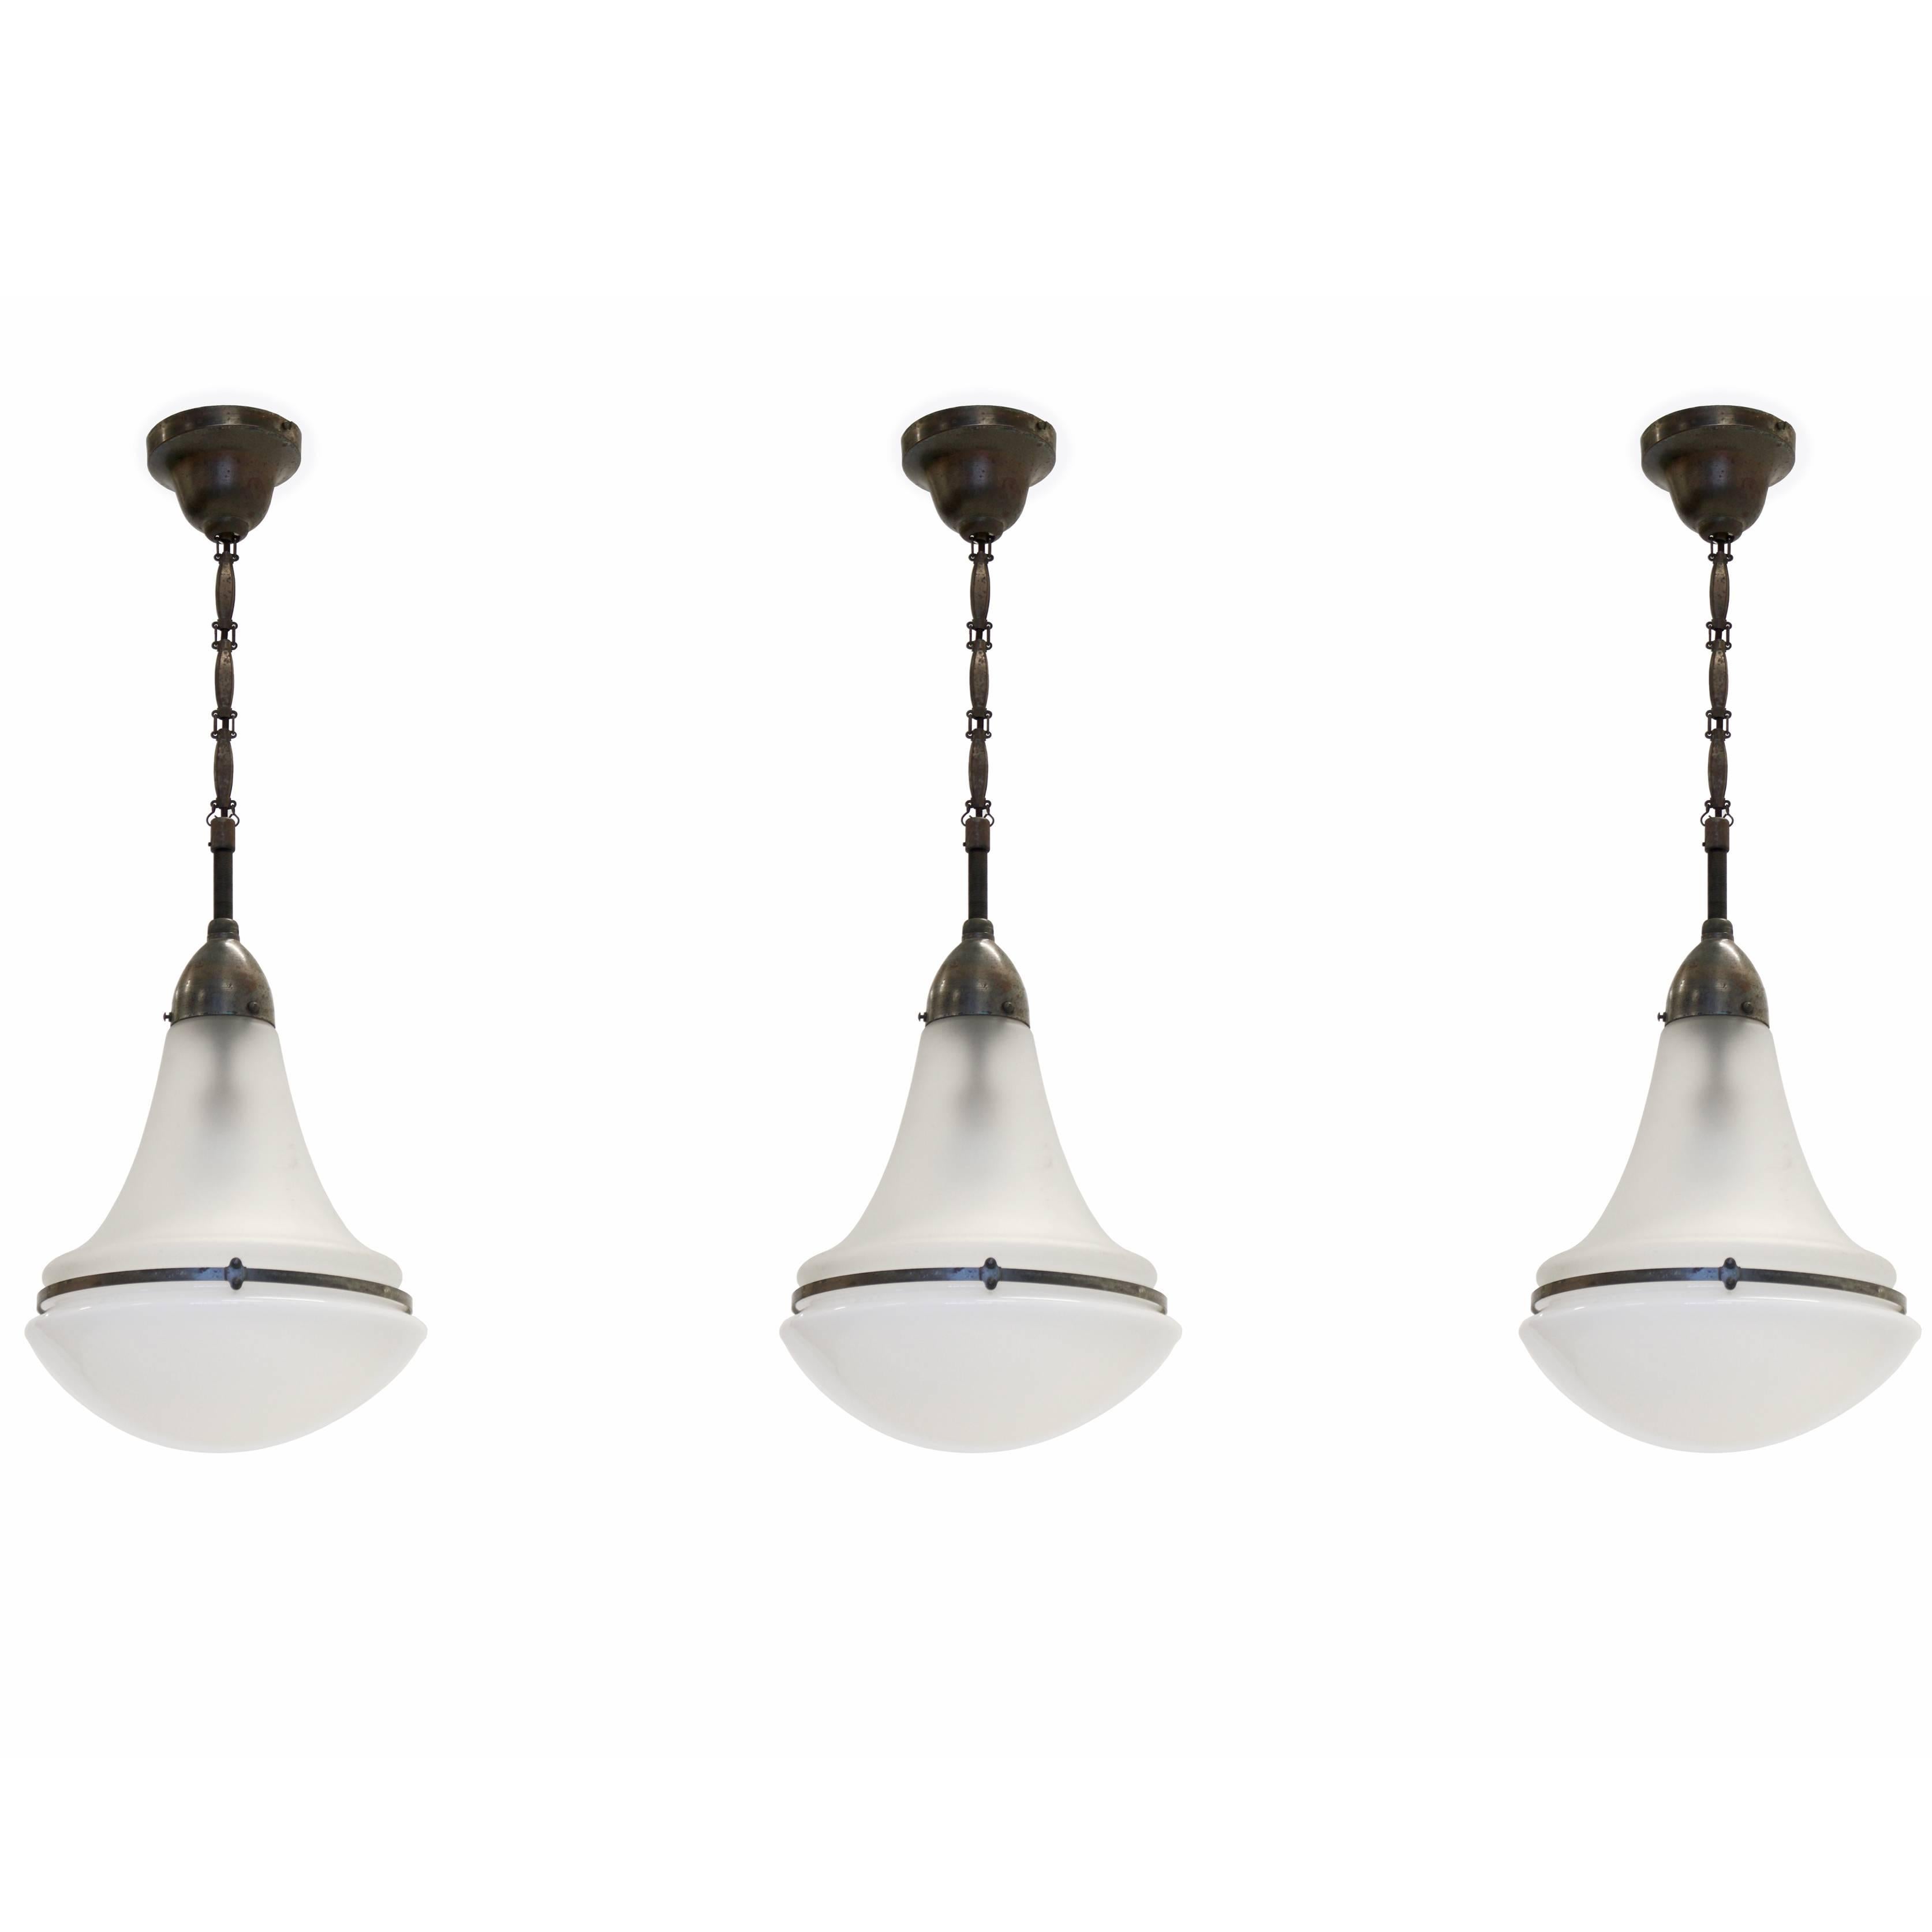 Set of Three Large 'Luzette' Ceiling Lamps by Peter Behrens, 1910s